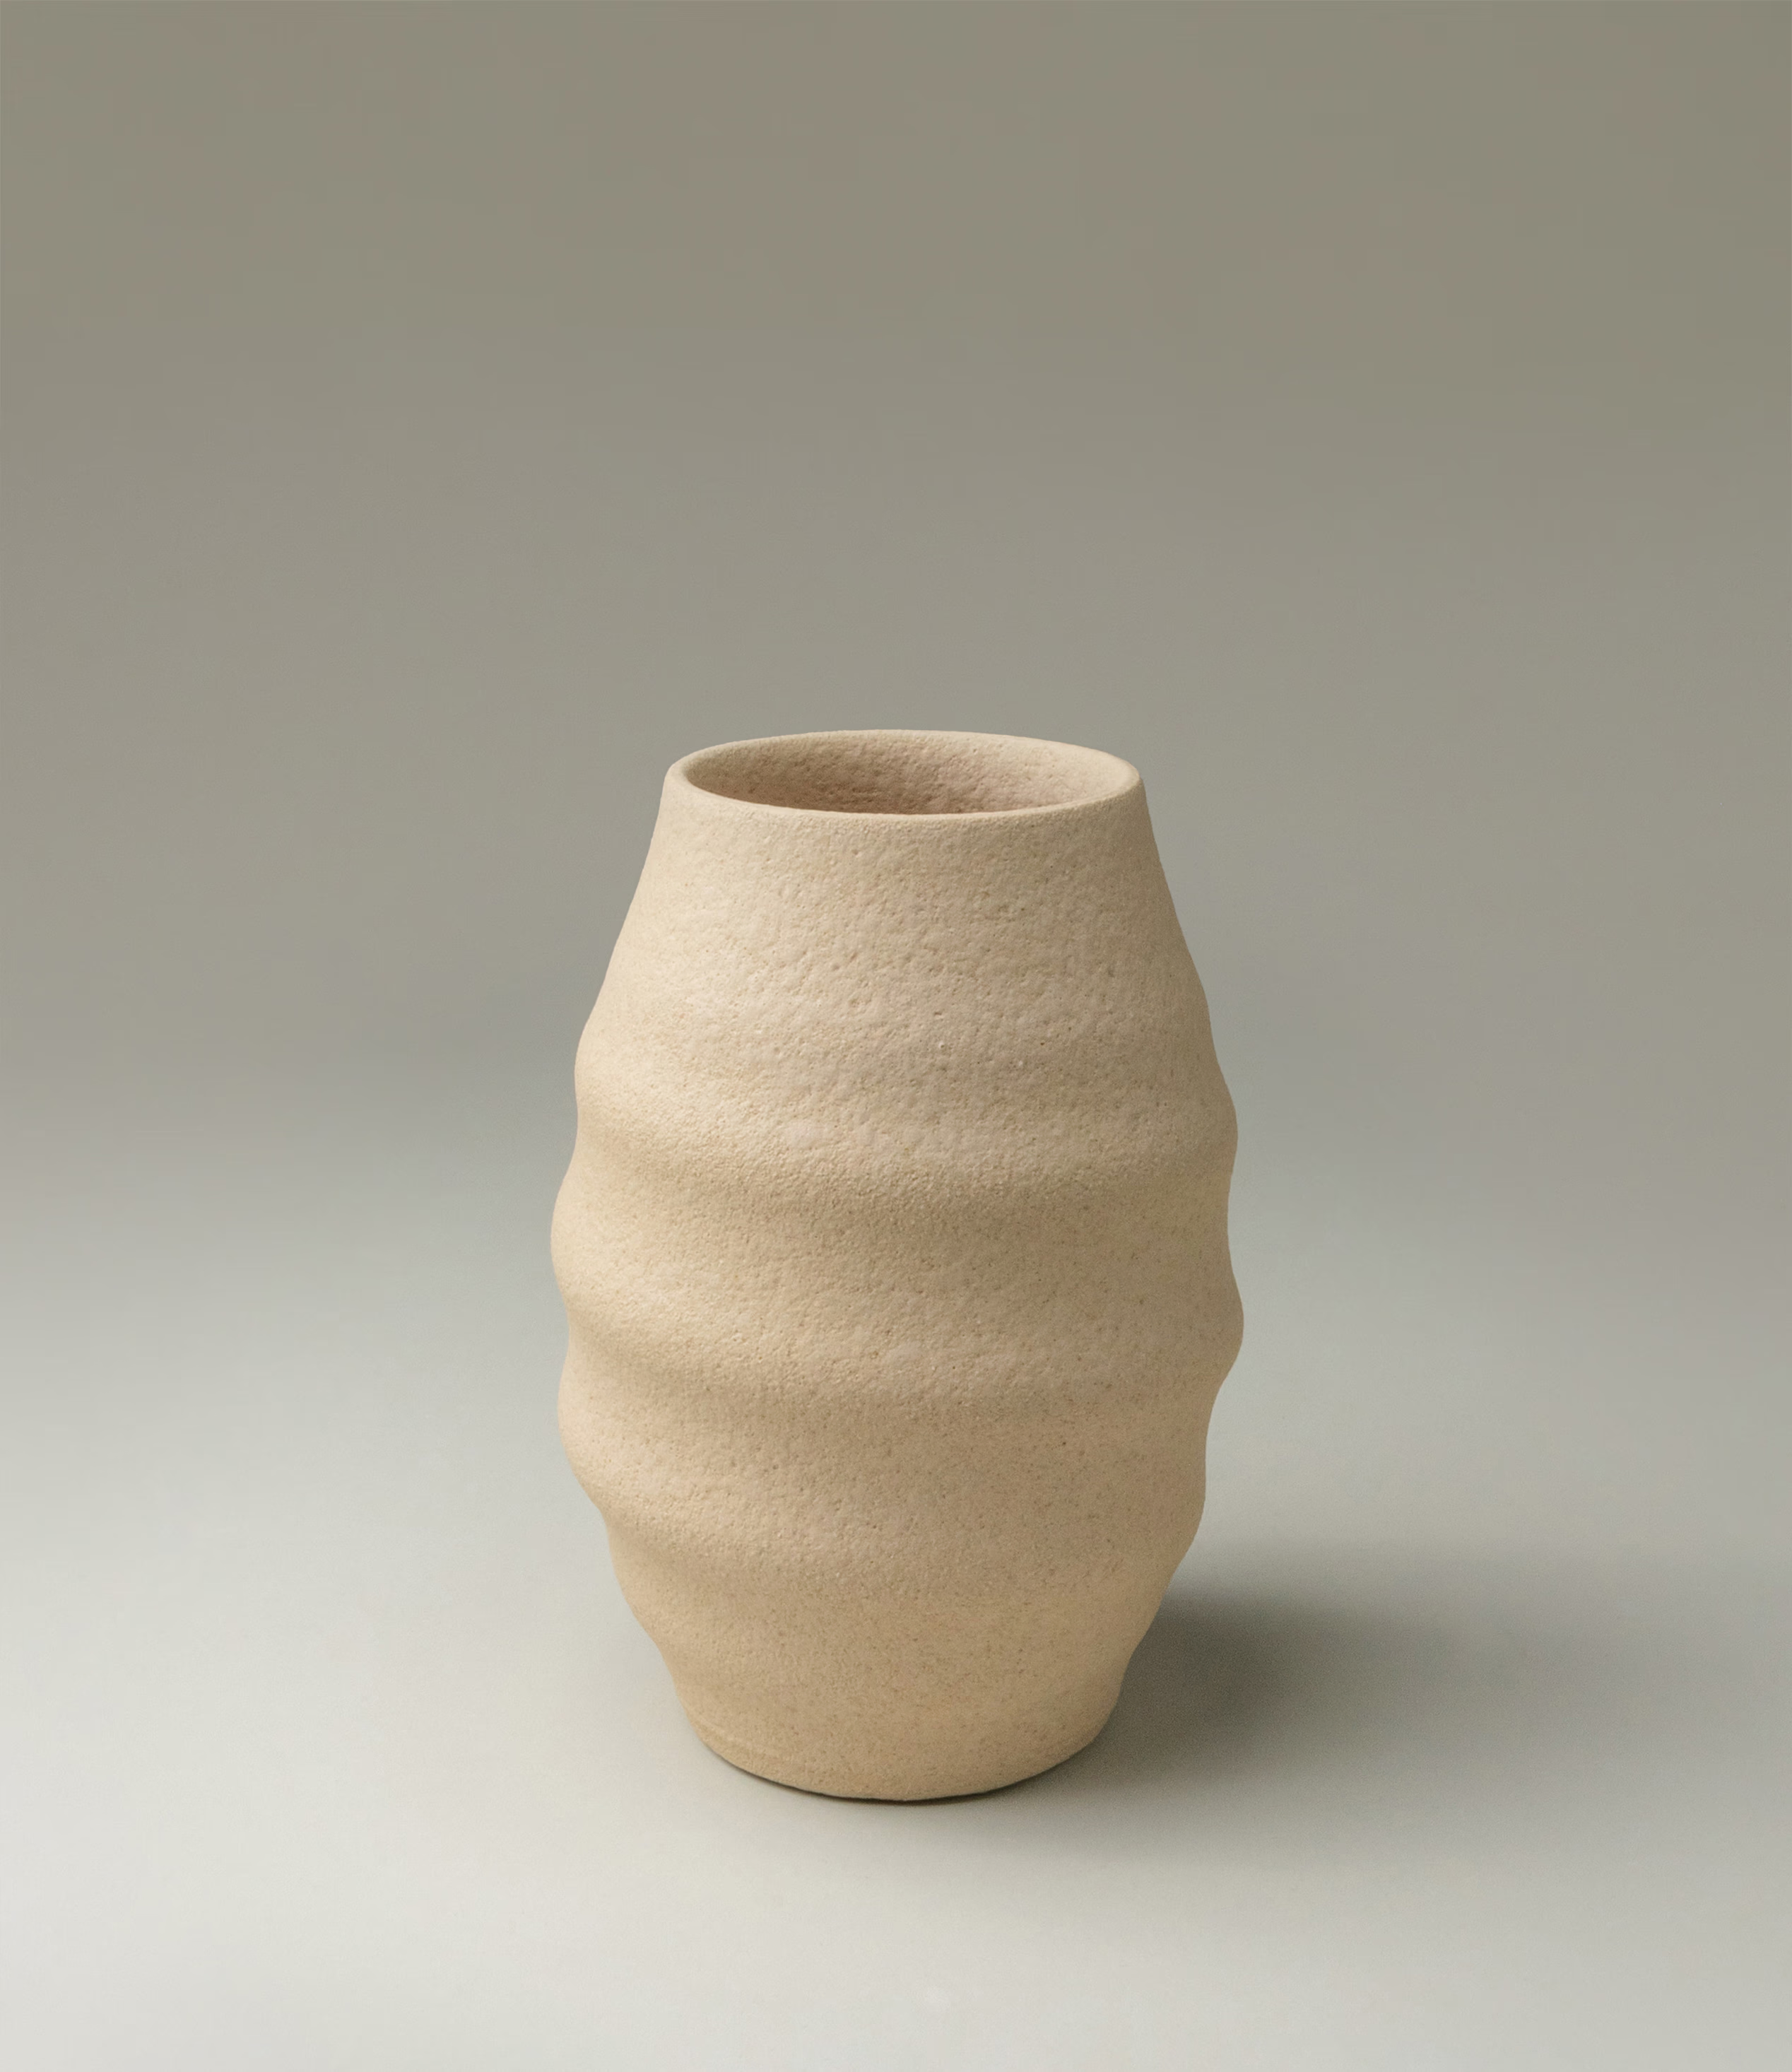 Aonia Handmade Vase was designed by Ocactuu. The shape is very similar to a honeycomb.